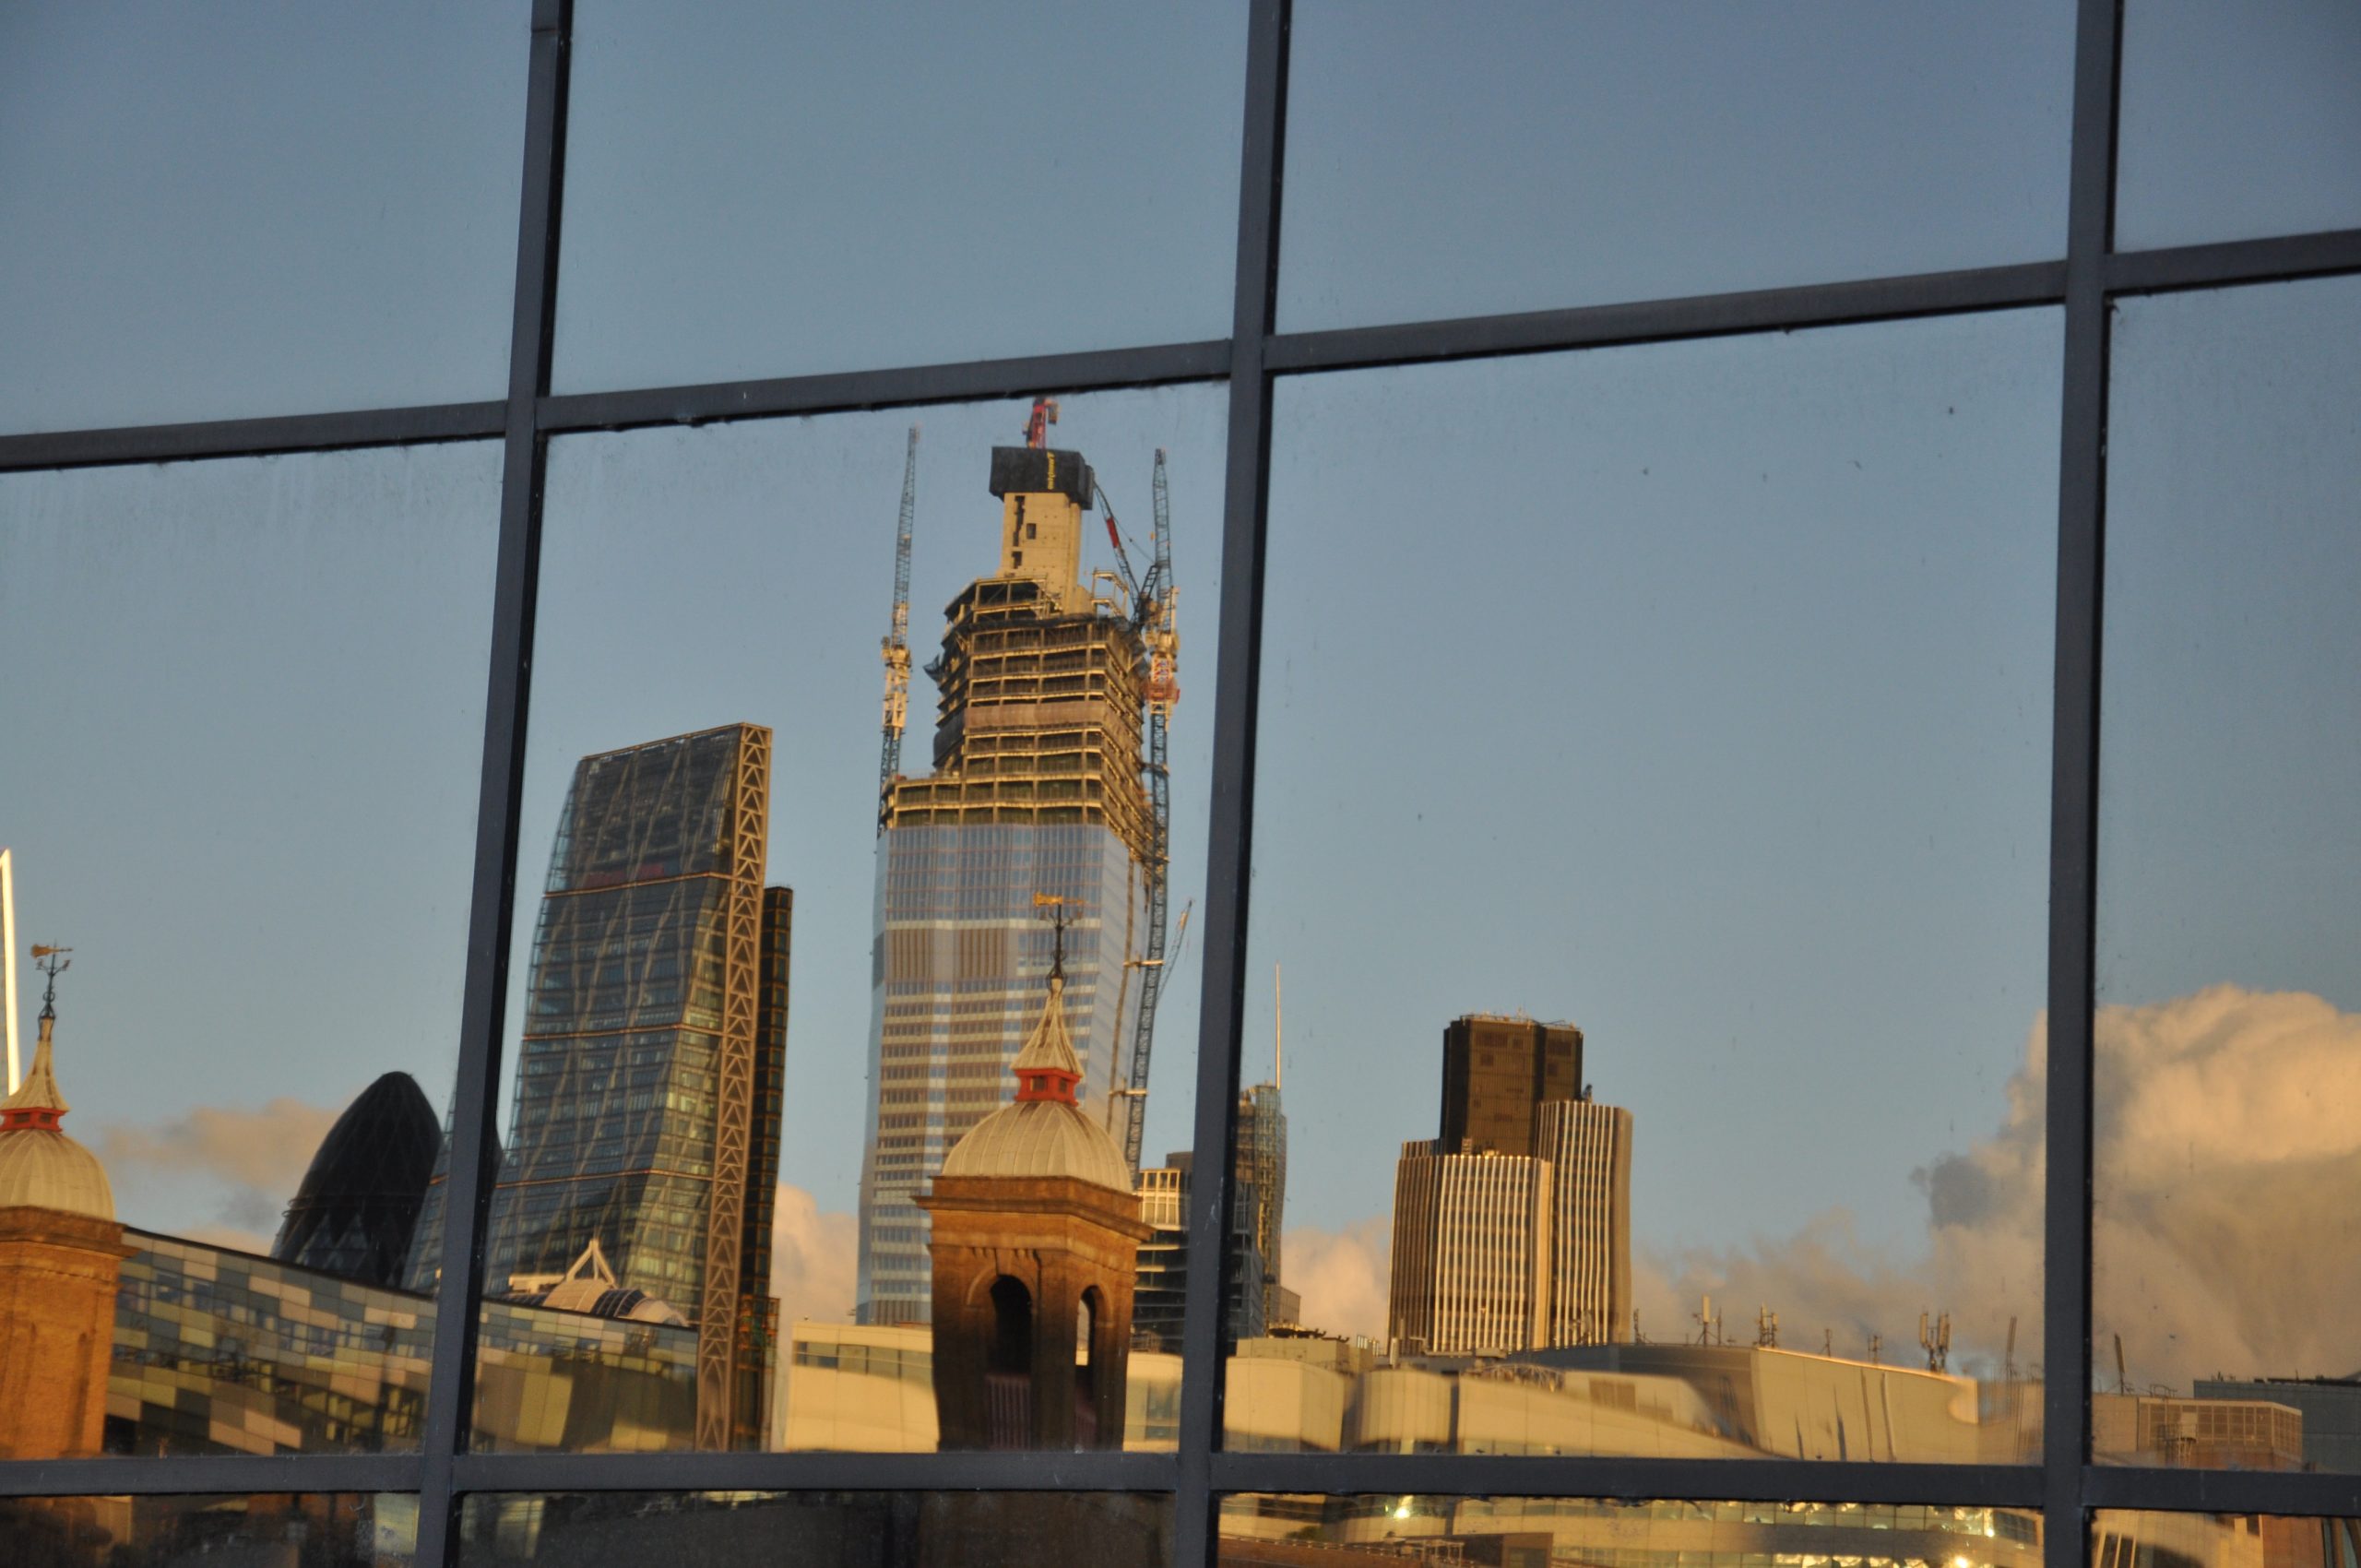 Reflection of tall London buildings in window